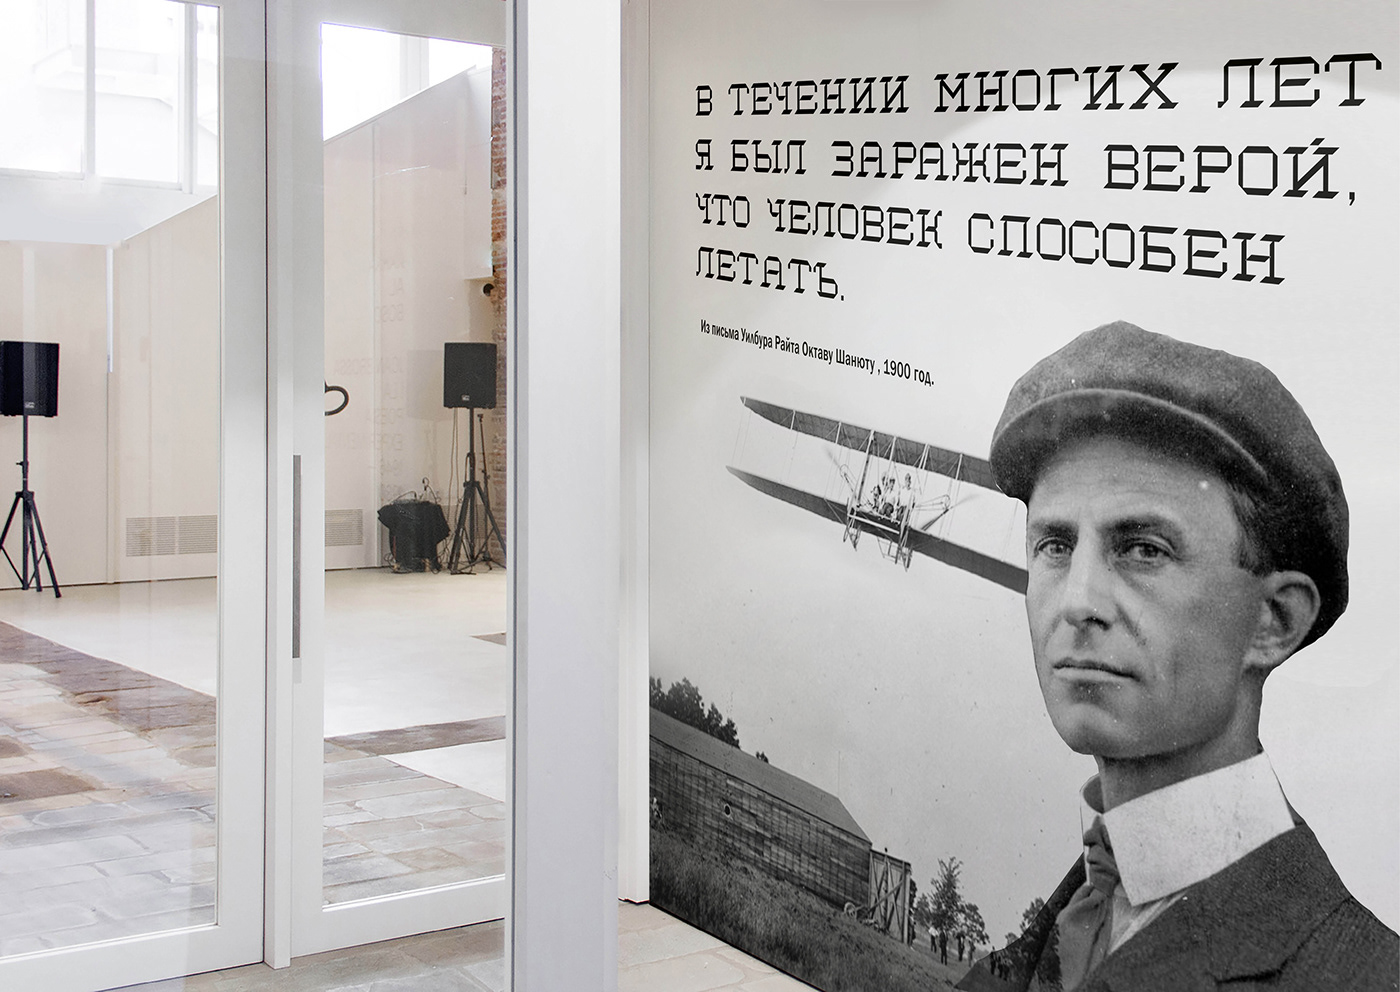 identity Exhibition  typography   Typeface Display aviation Wright Brothers flight history Technology